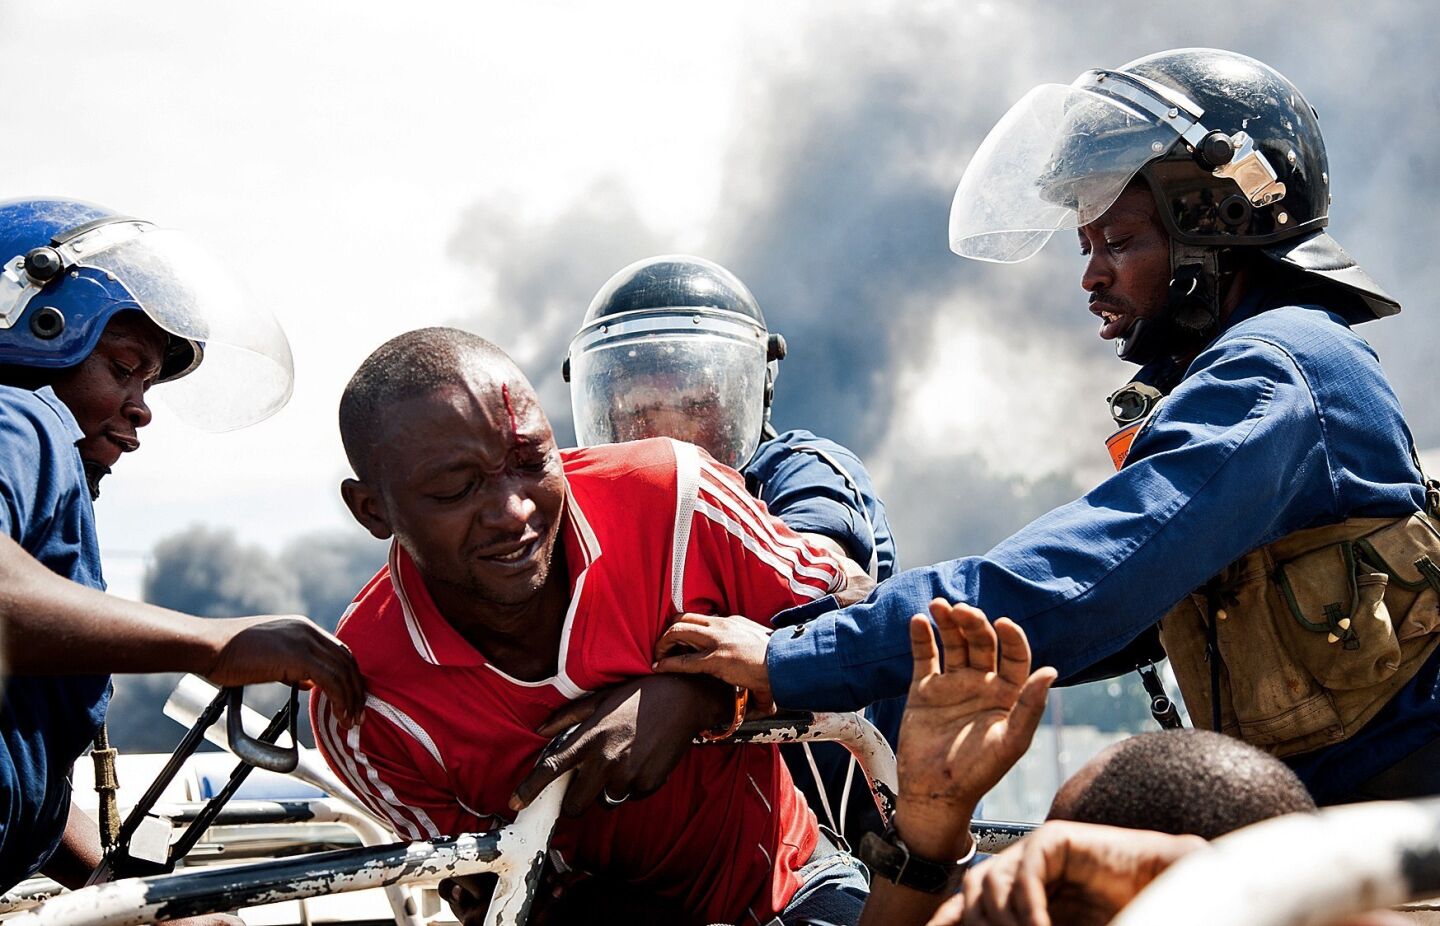 A man is lifted by police during a protest in Bujumbura. A top Burundian general announced the overthrow of President Pierre Nkurunziza, following weeks of violent protests against the president's bid to stand for a third term. Nkurunziza asserted he remained in charge.